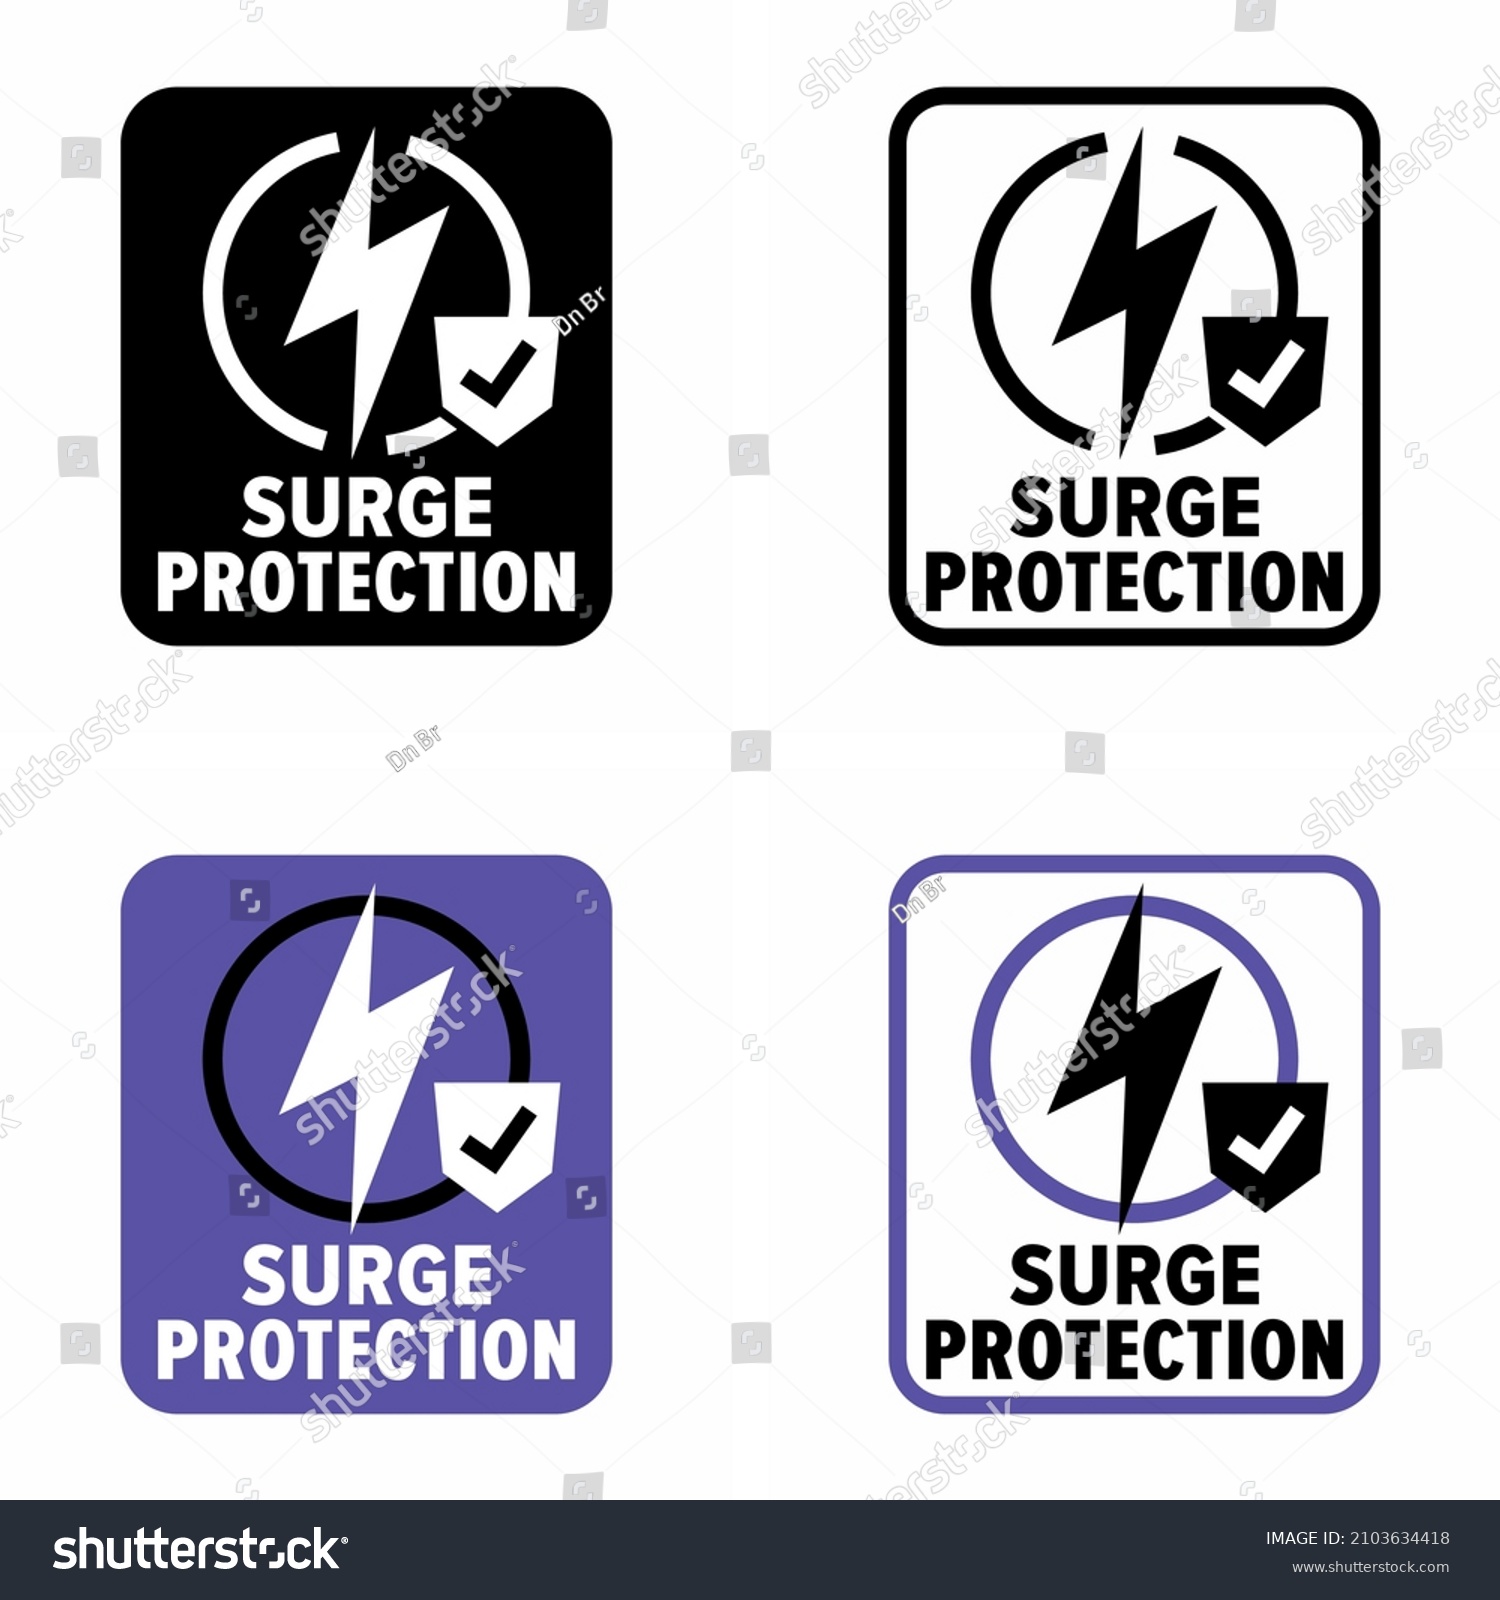 "Surge Protection" vector information sign #2103634418